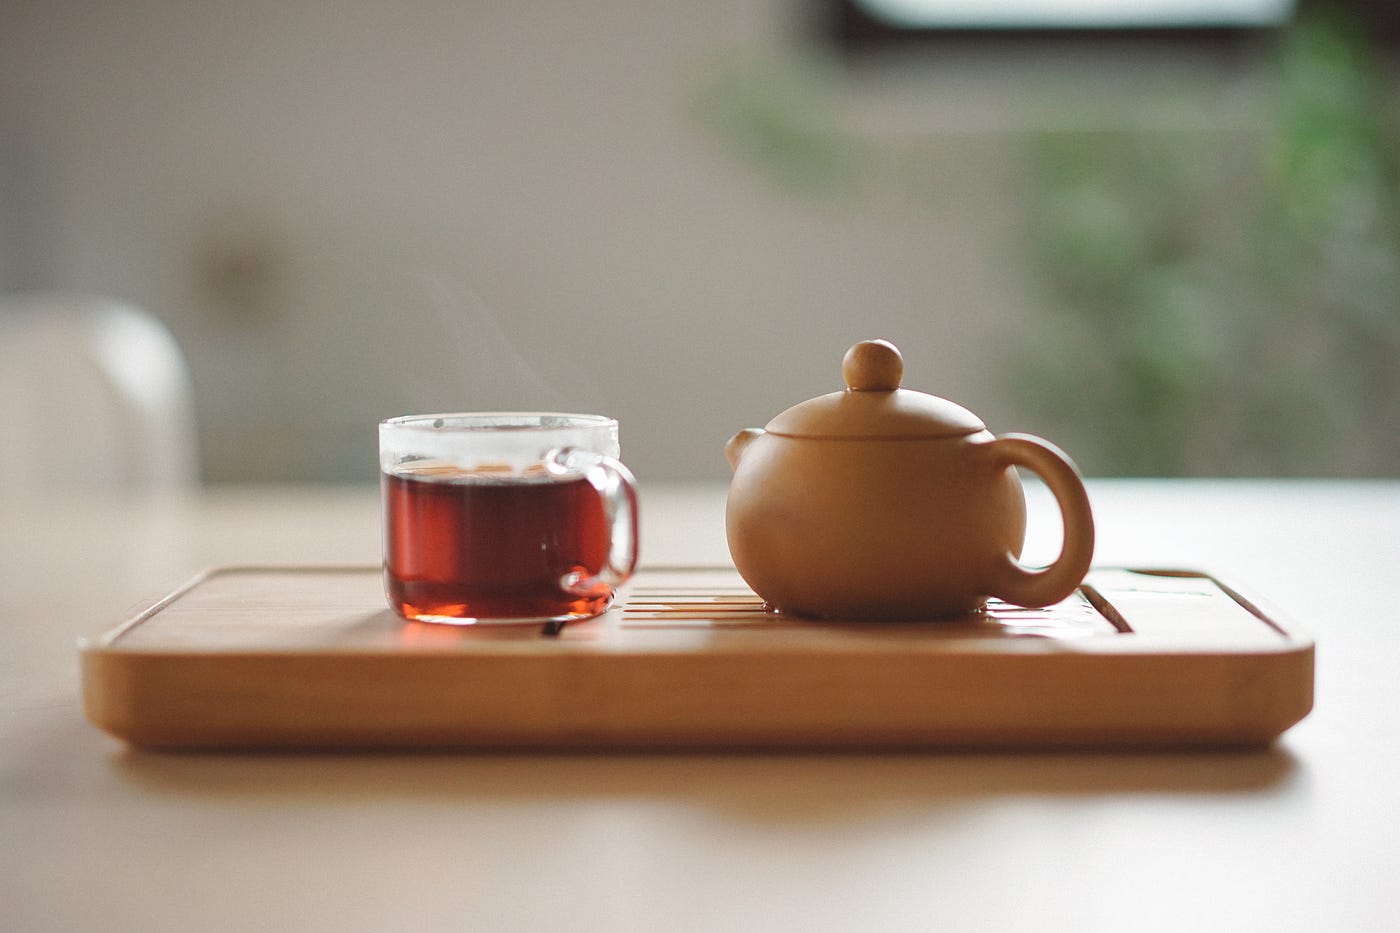 Tea in a clear cup on the left. A tan teapot perches on the right Both sit on a wooden stand. Preferences for black tea are influenced by genes.